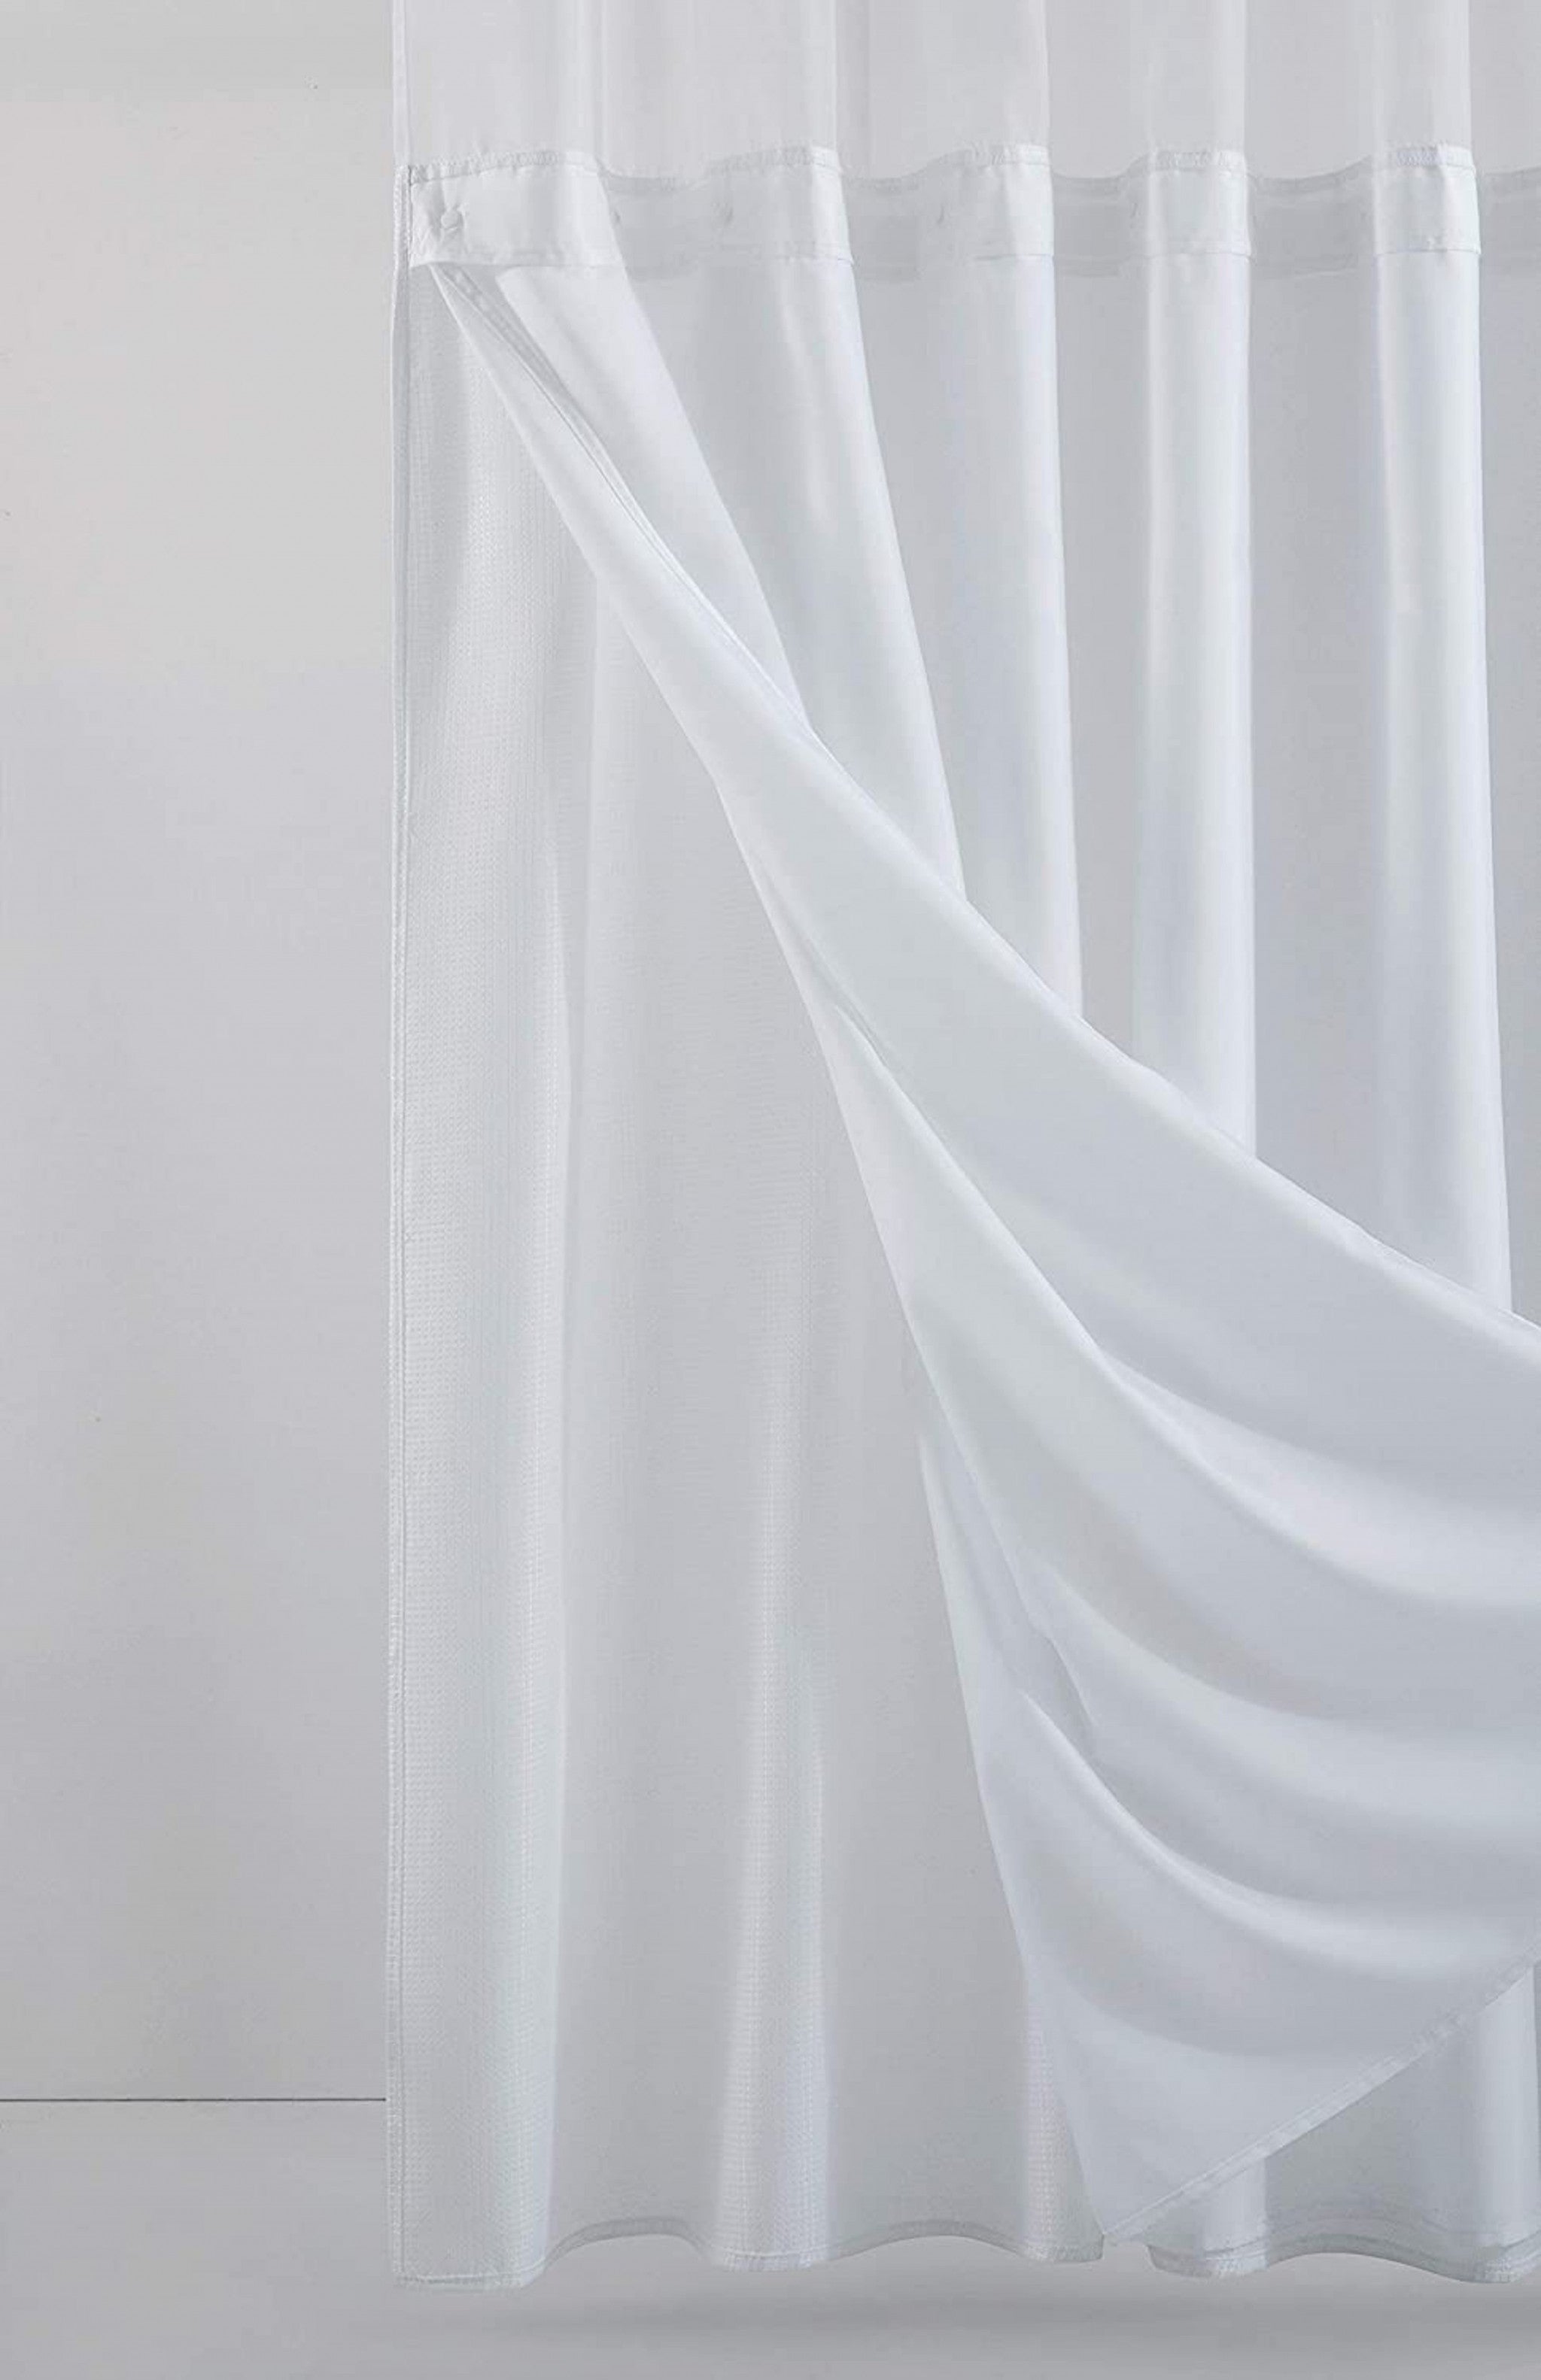 White Sheer and Grid Shower Curtain and Liner Set